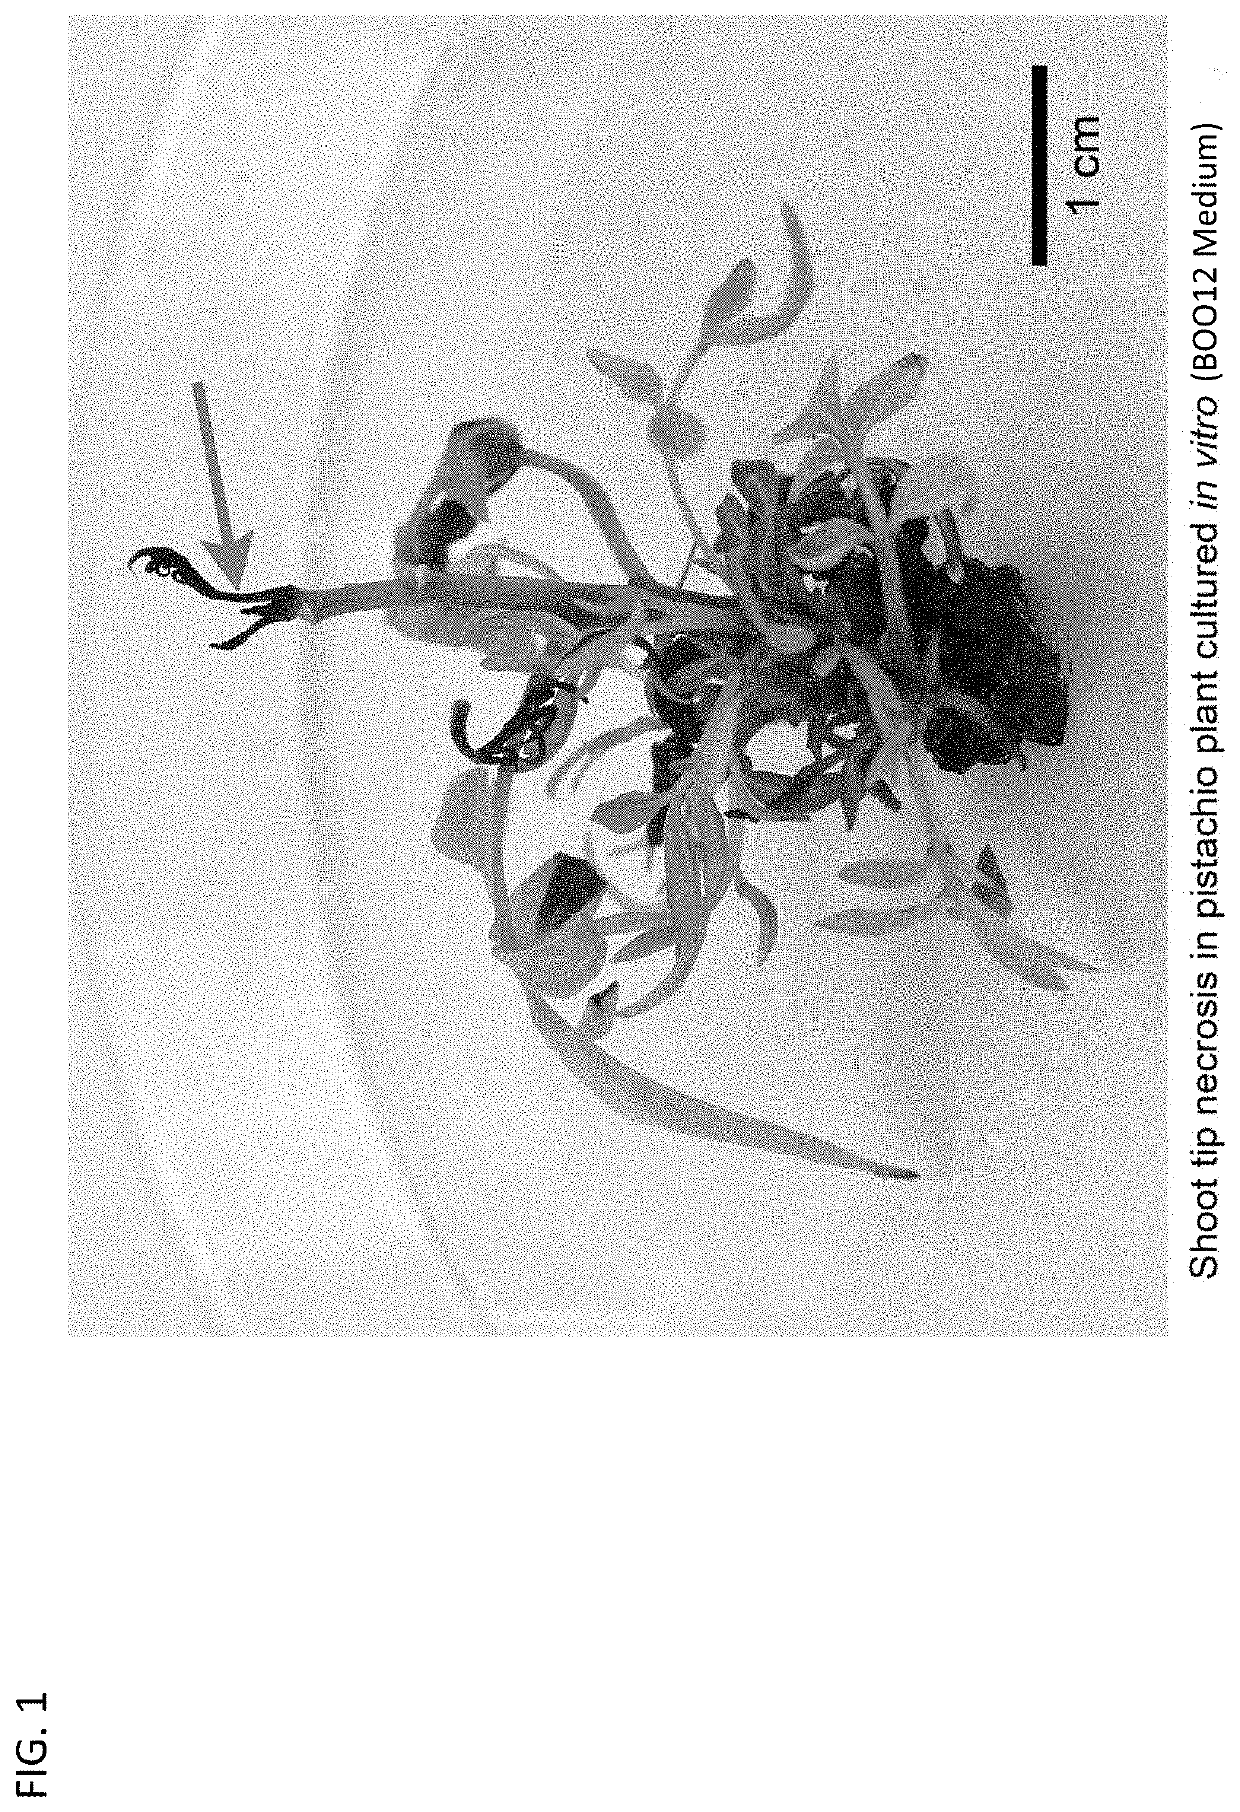 Compositions and methods for large-scale in vitro plant bioculture